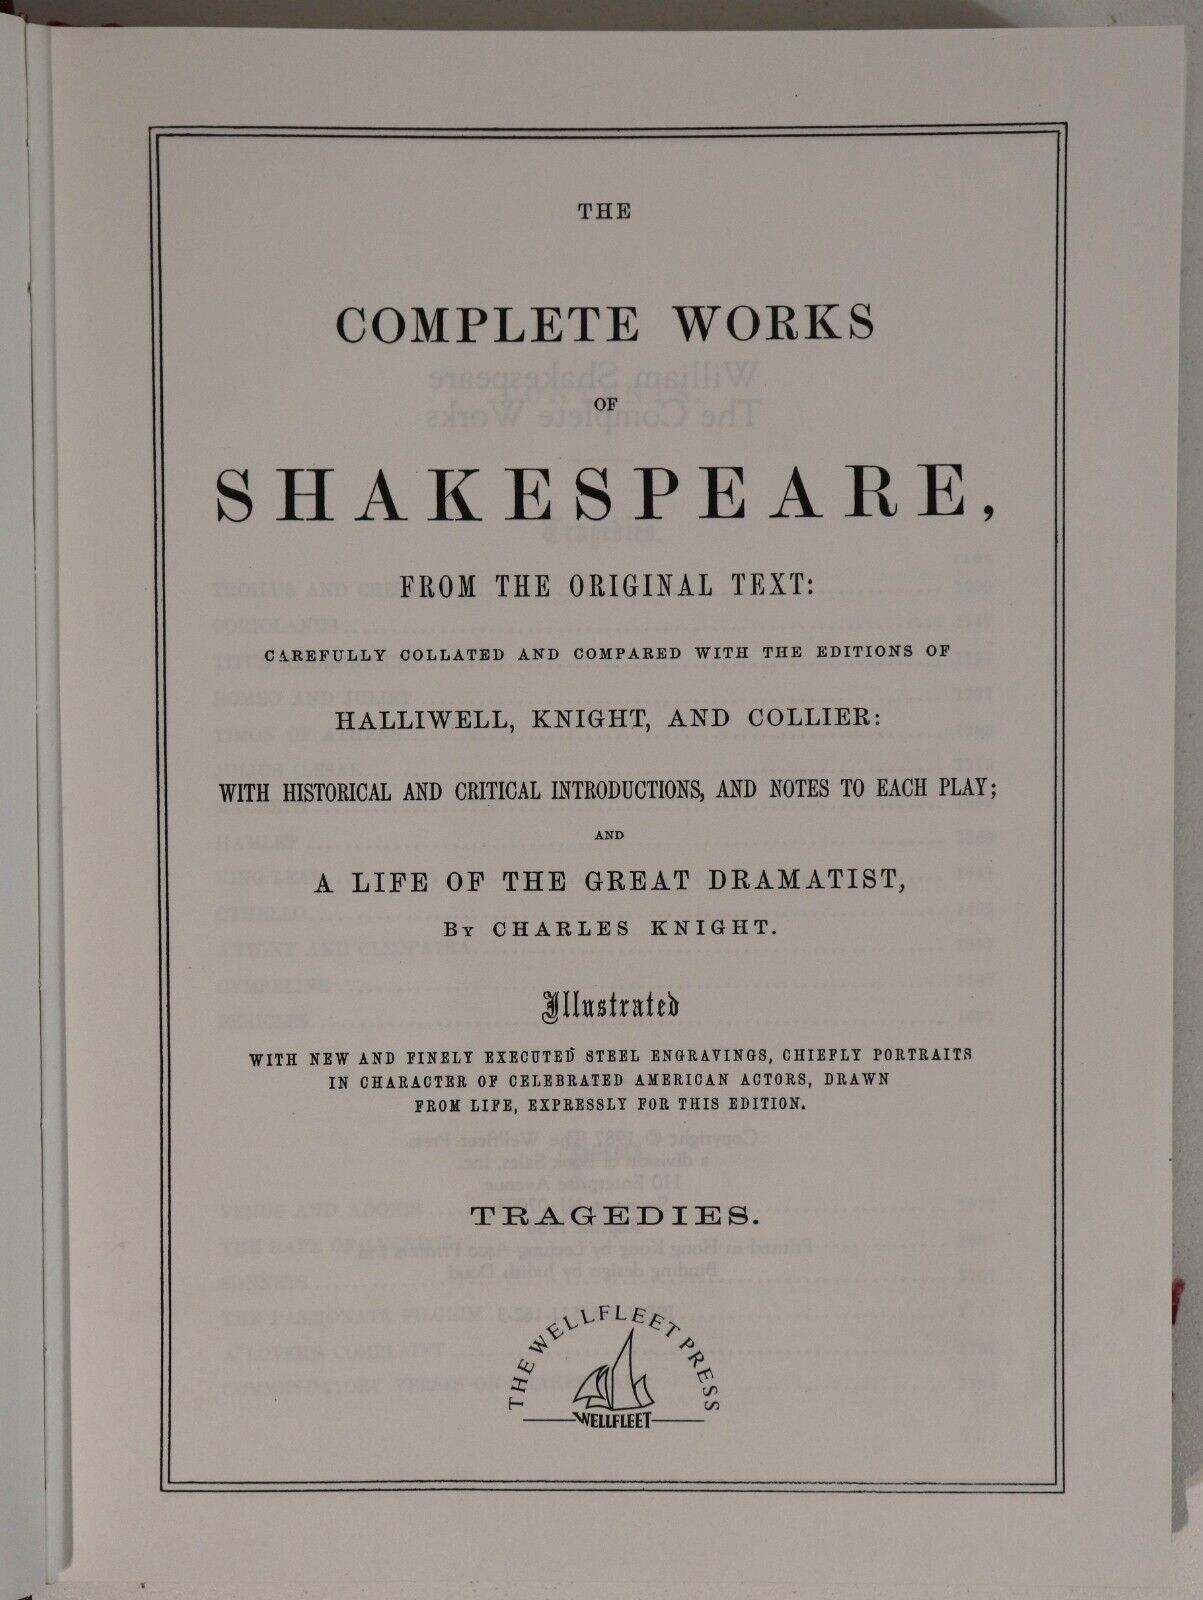 The Complete Works of Shakespeare - 1987 - Classic Literature 3 Volume Book Set